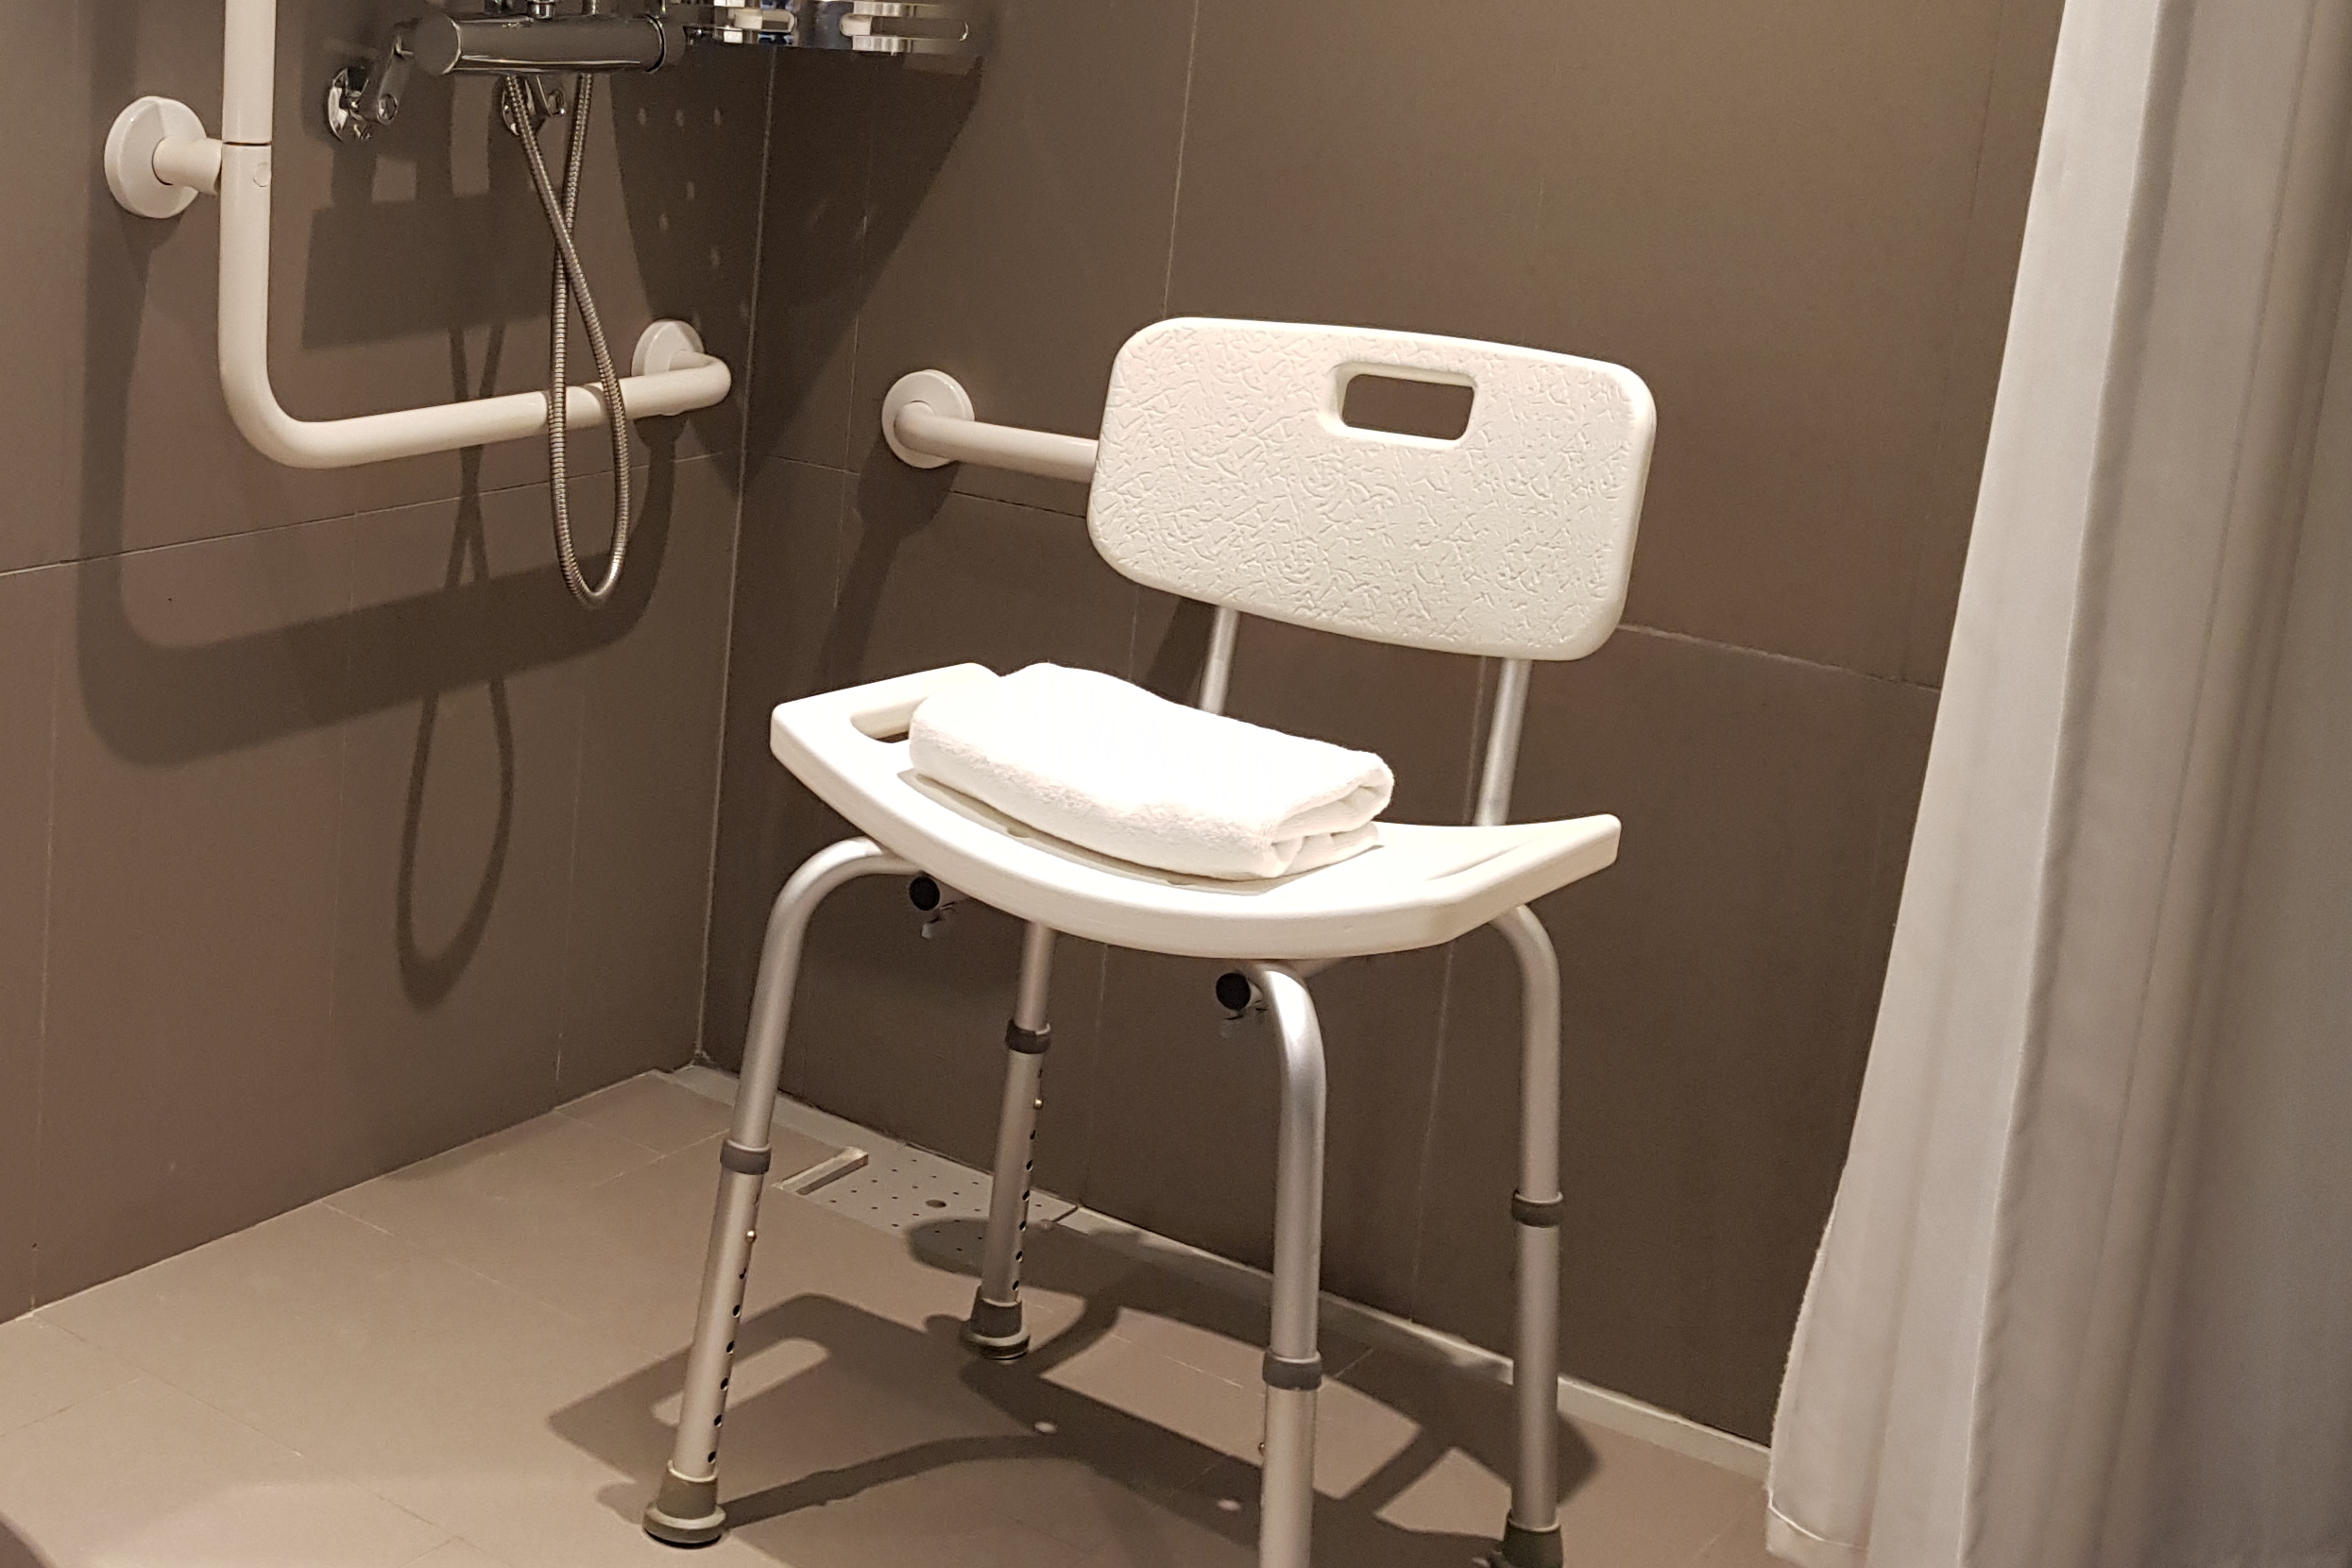 Bathroom0 : Restrooms of the L7 Myeongdong by Lotte equipped with a shower chair
